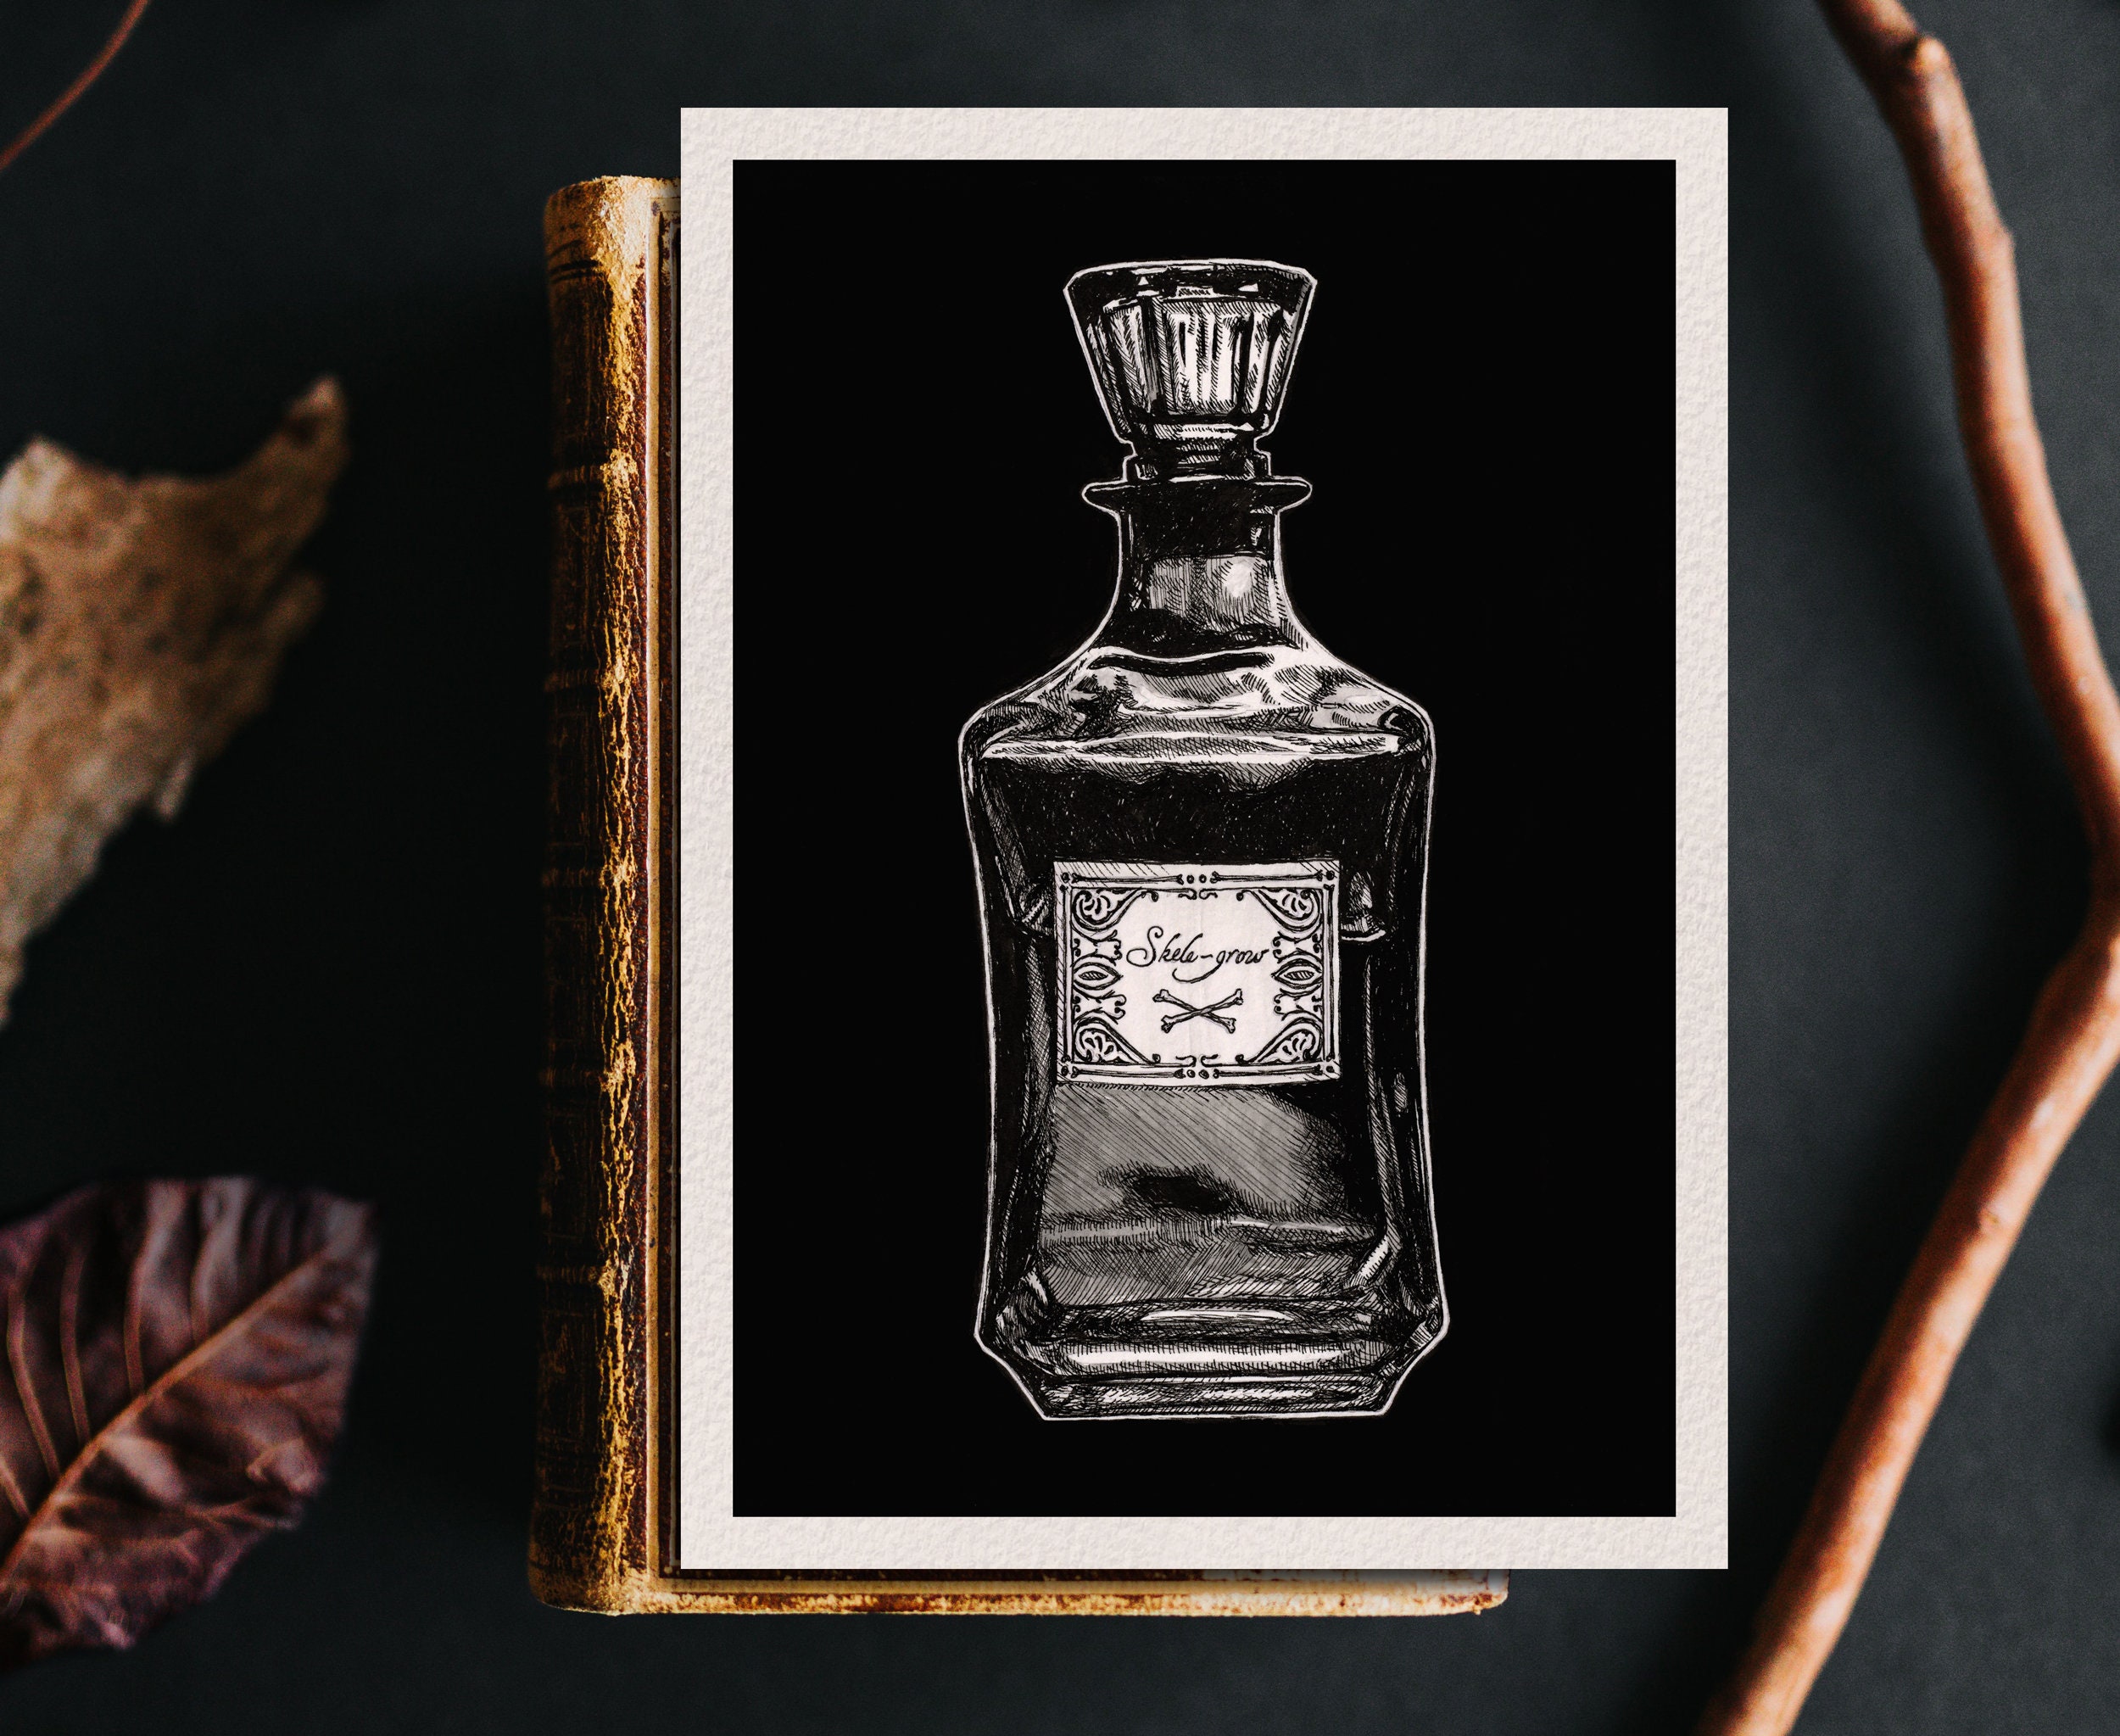 The Apothecary Aesthetic That's Equal Parts Moody And Charming